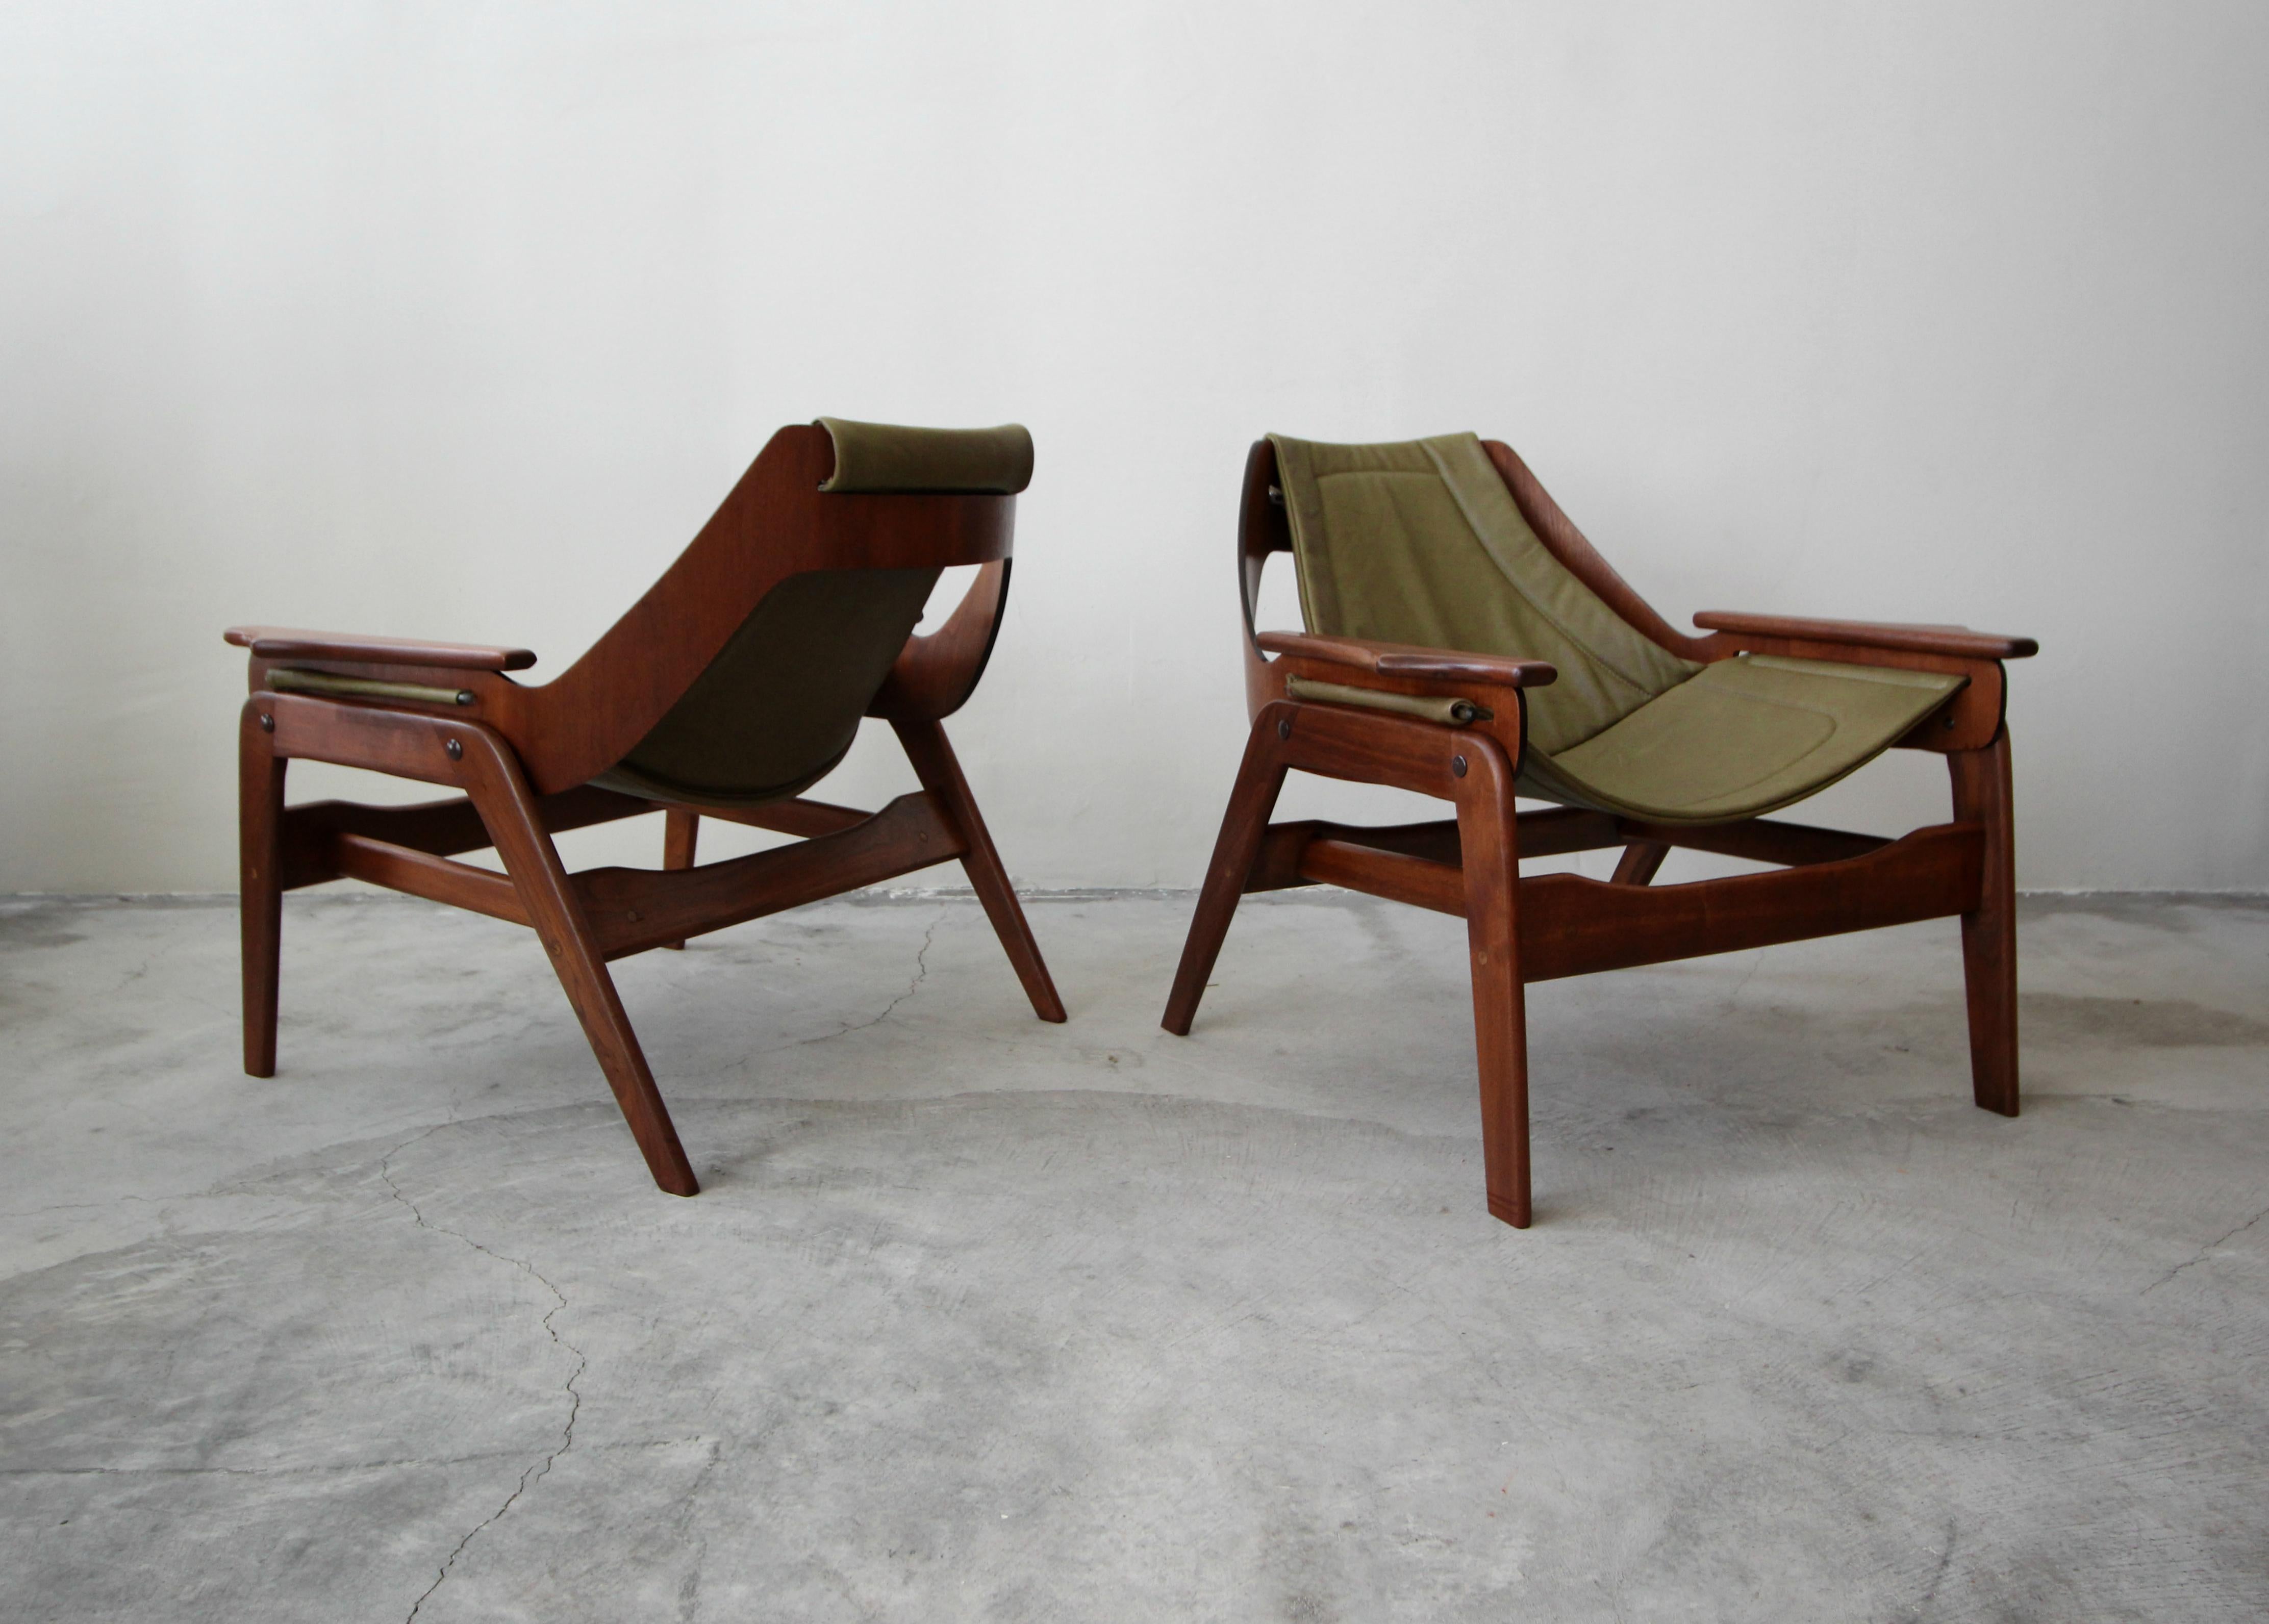 Beautiful pair of midcentury walnut and leather sling chairs by Jerry Johnson. The chairs feature beautiful sculptural frames and newly upholstered olive green leather slings. These chairs are the epitome of midcentury seating. More like art than